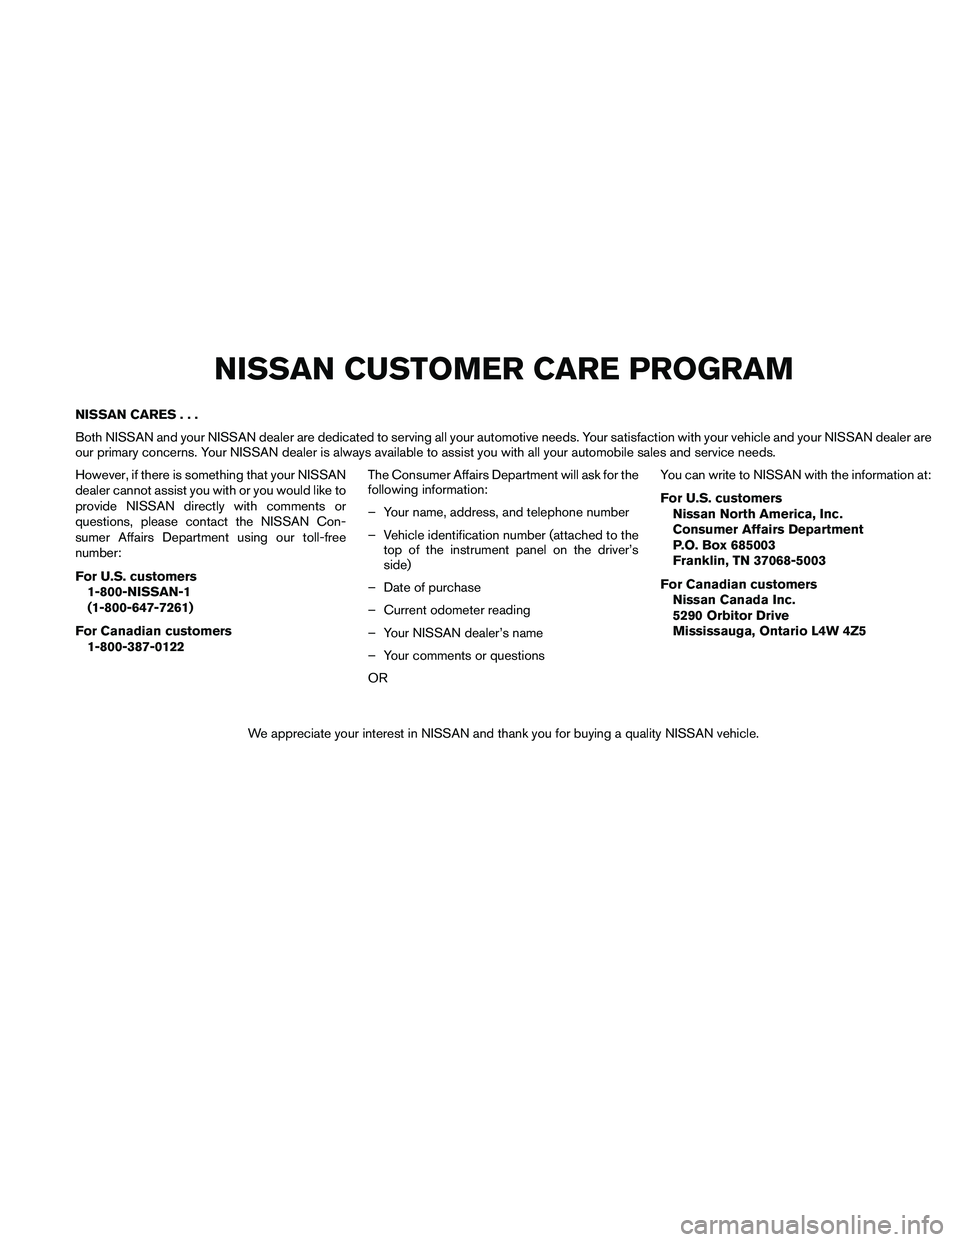 NISSAN PATHFINDER 2010  Owner´s Manual NISSAN CARES...
Both NISSAN and your NISSAN dealer are dedicated to serving all your automotive needs. Your satisfaction with your vehicle and your NISSAN dealer are
our primary concerns. Your NISSAN 